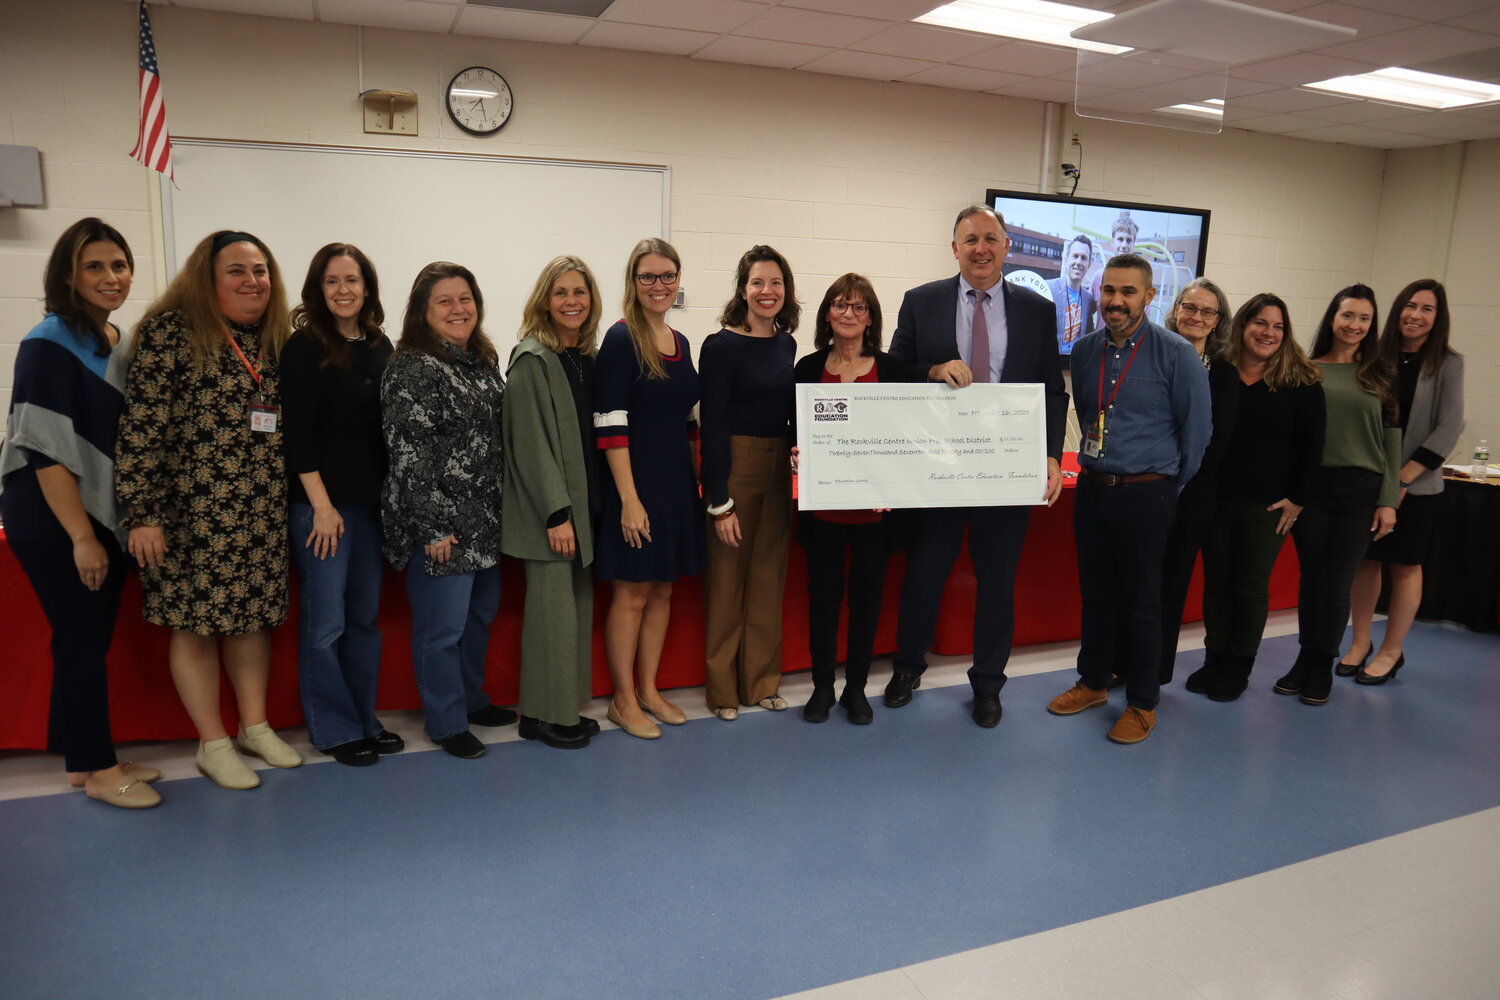 Members of the Rockville Centre Education Foundation presented a check for $27,720 to Superintendent Matt Gaven and members of the Board of Education on Nov. 16.